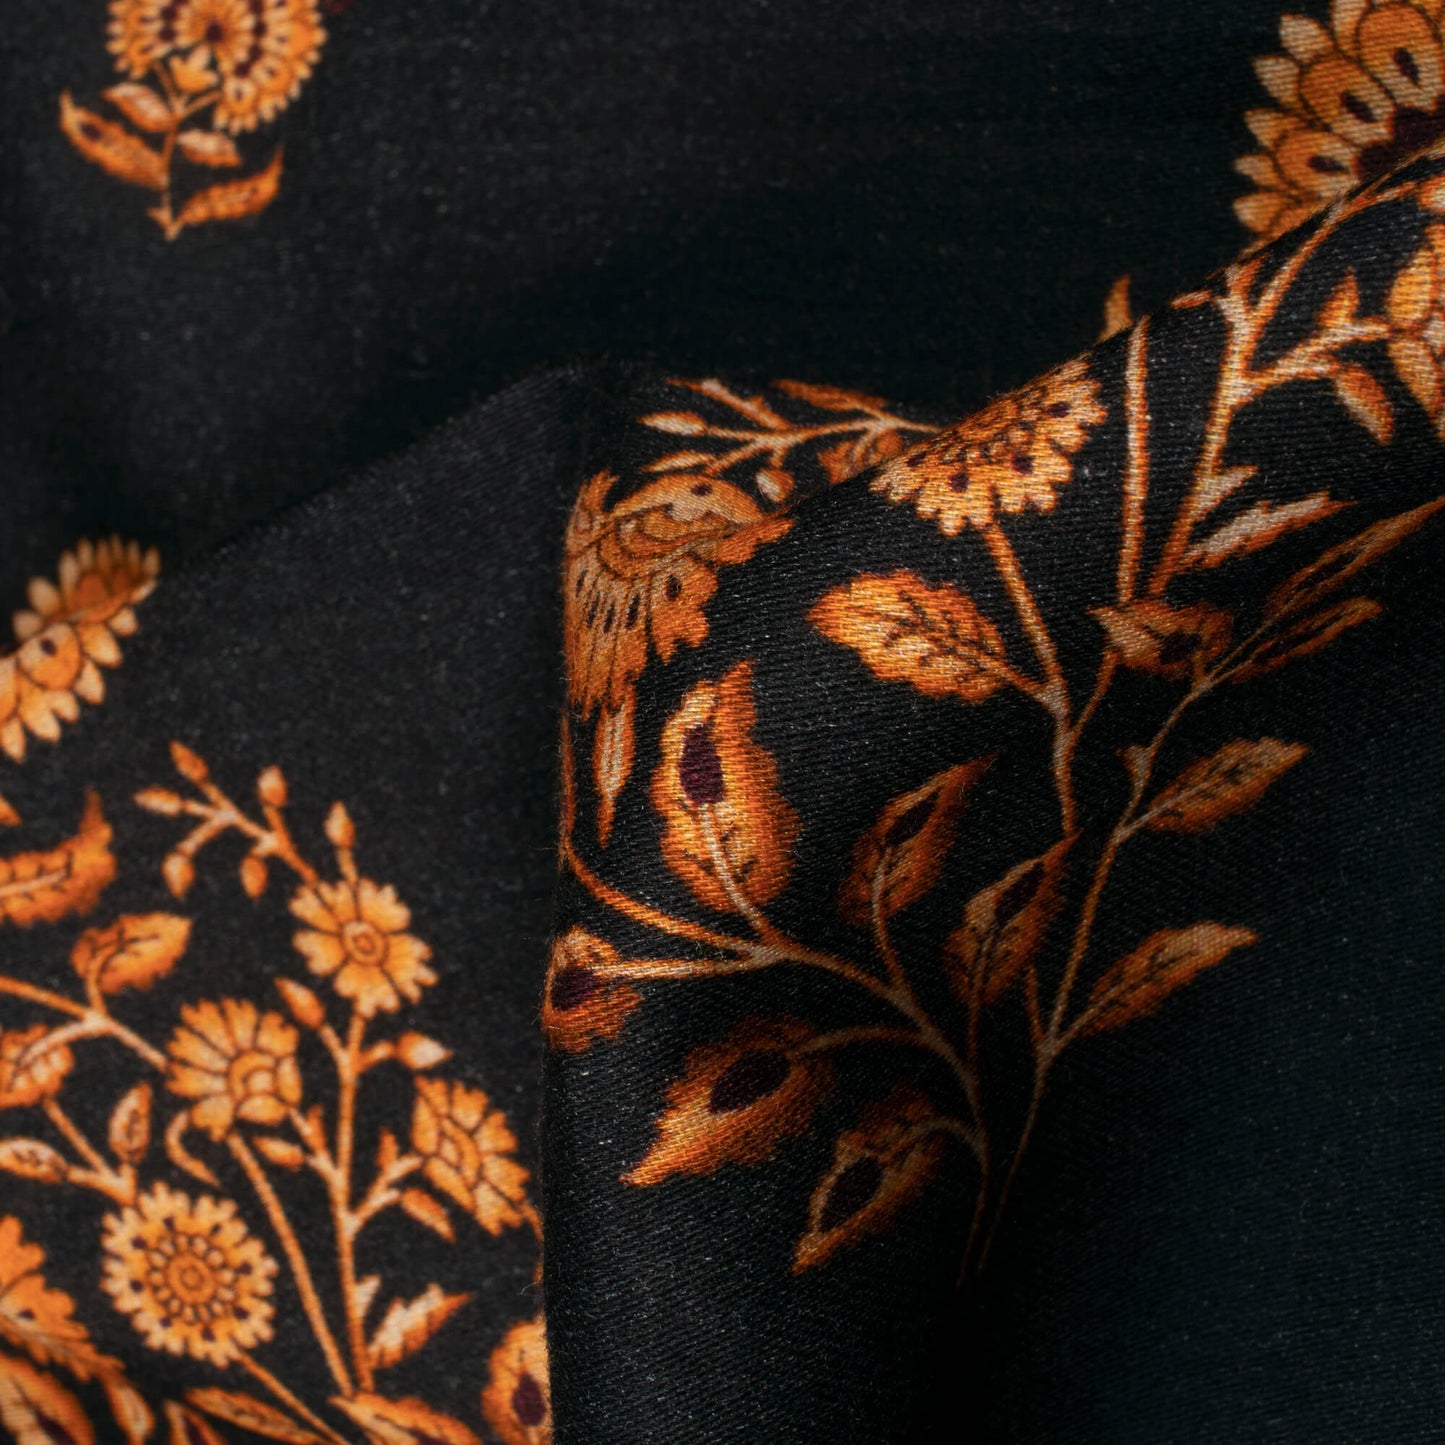 Fire Orange And Black Floral Digital Print Viscose Rayon Fabric(Width 58 Inches)